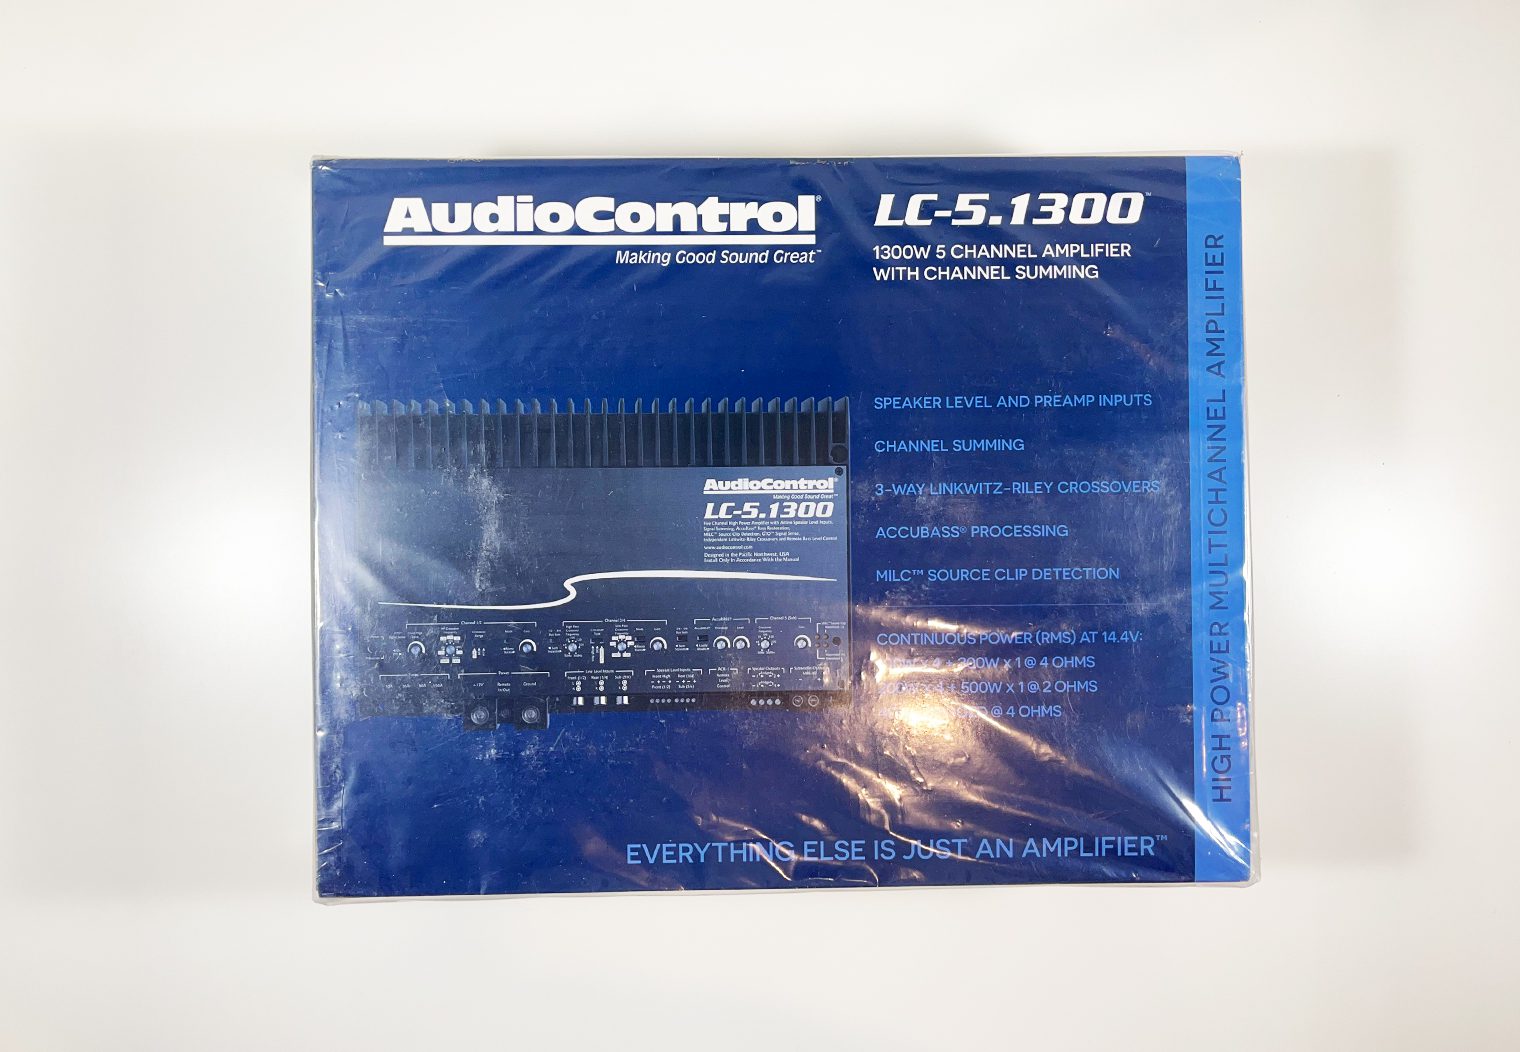 AudioControl LC-5.1300 In box and wrapped front view